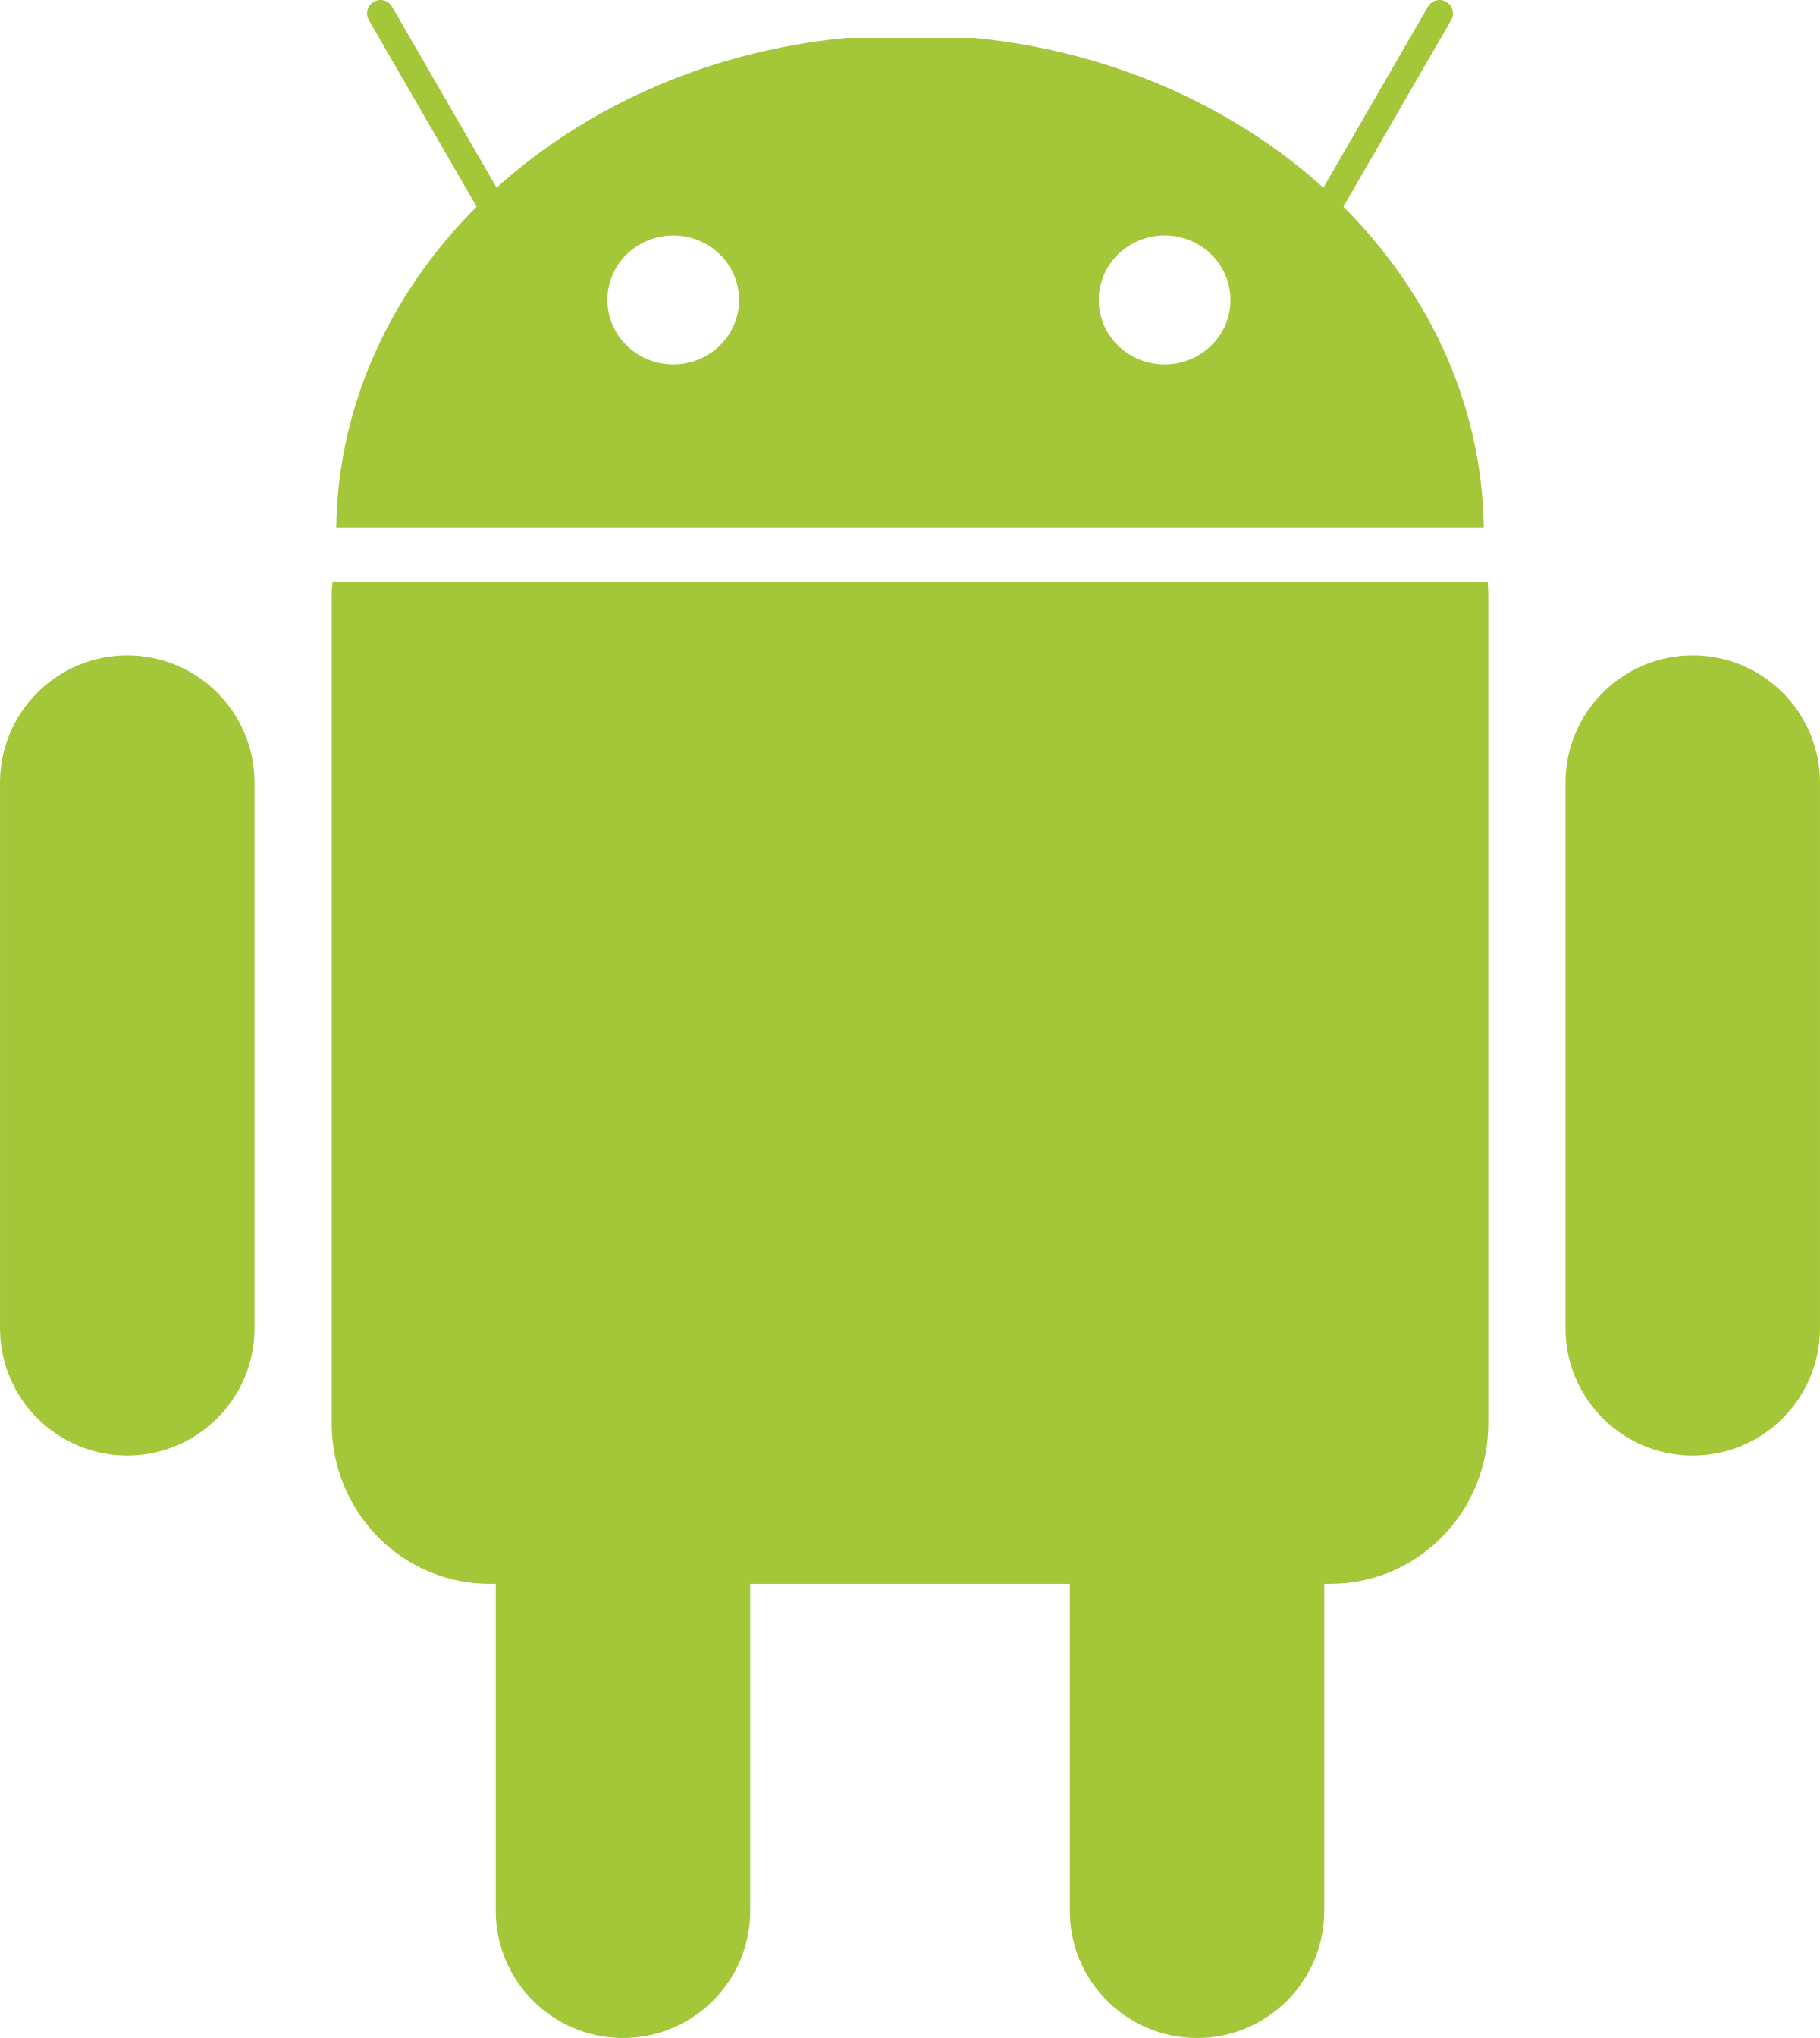 Android App Store Logo - Top 7 Advantages of an Alternative Android App Store - Ottilie and Lulu